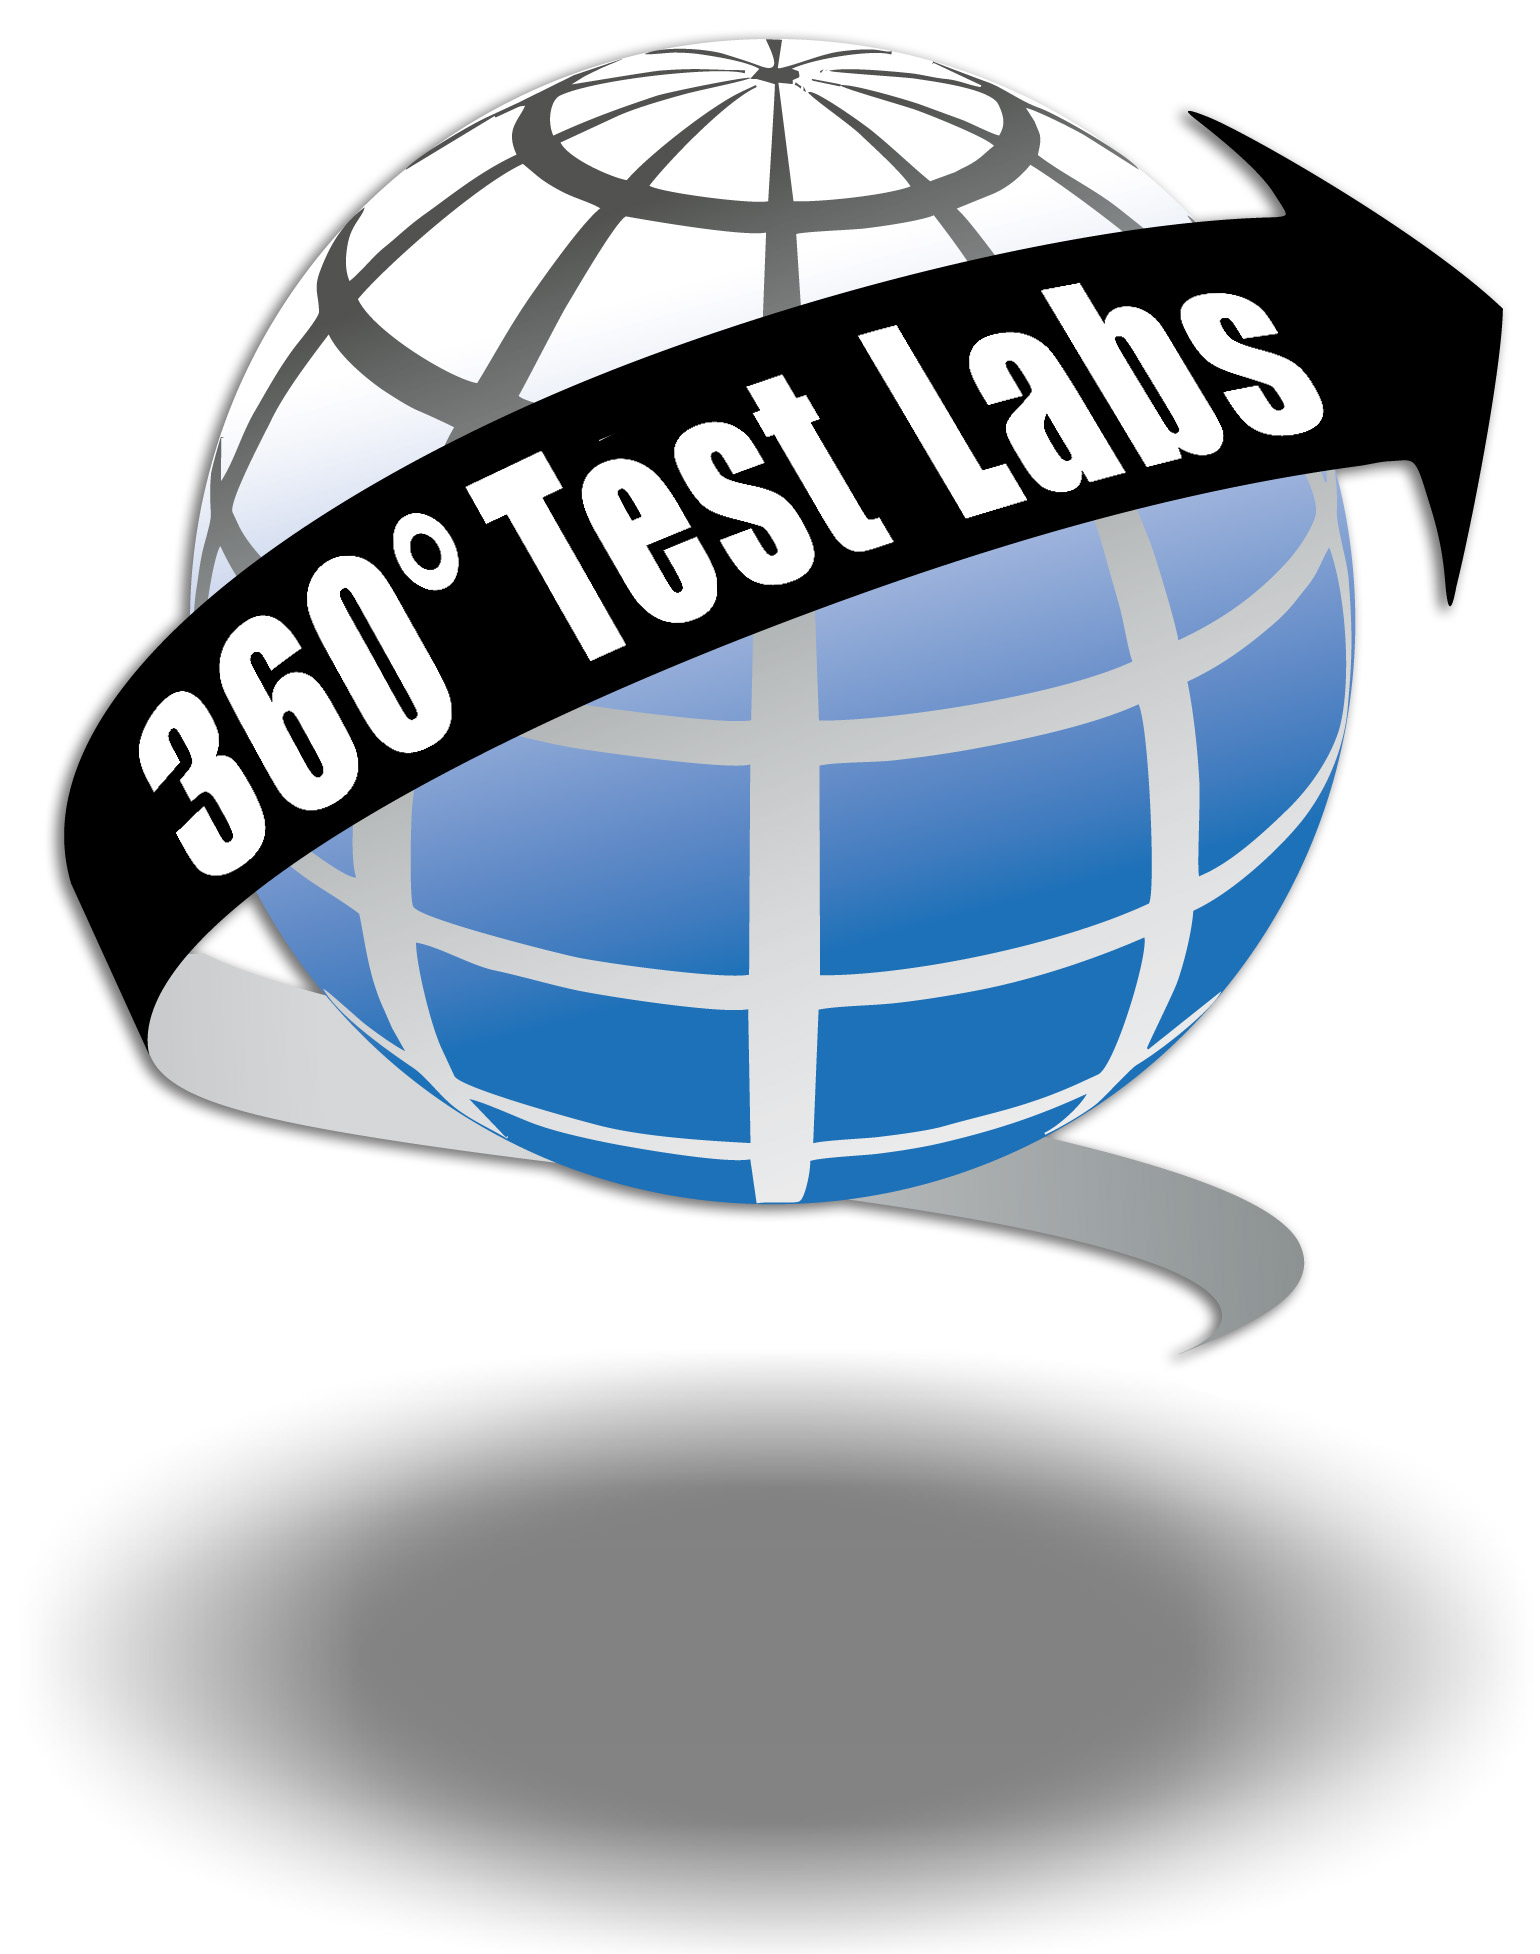 360° Test - <div>360° Test is an independent, third party lab dedicated to efficiently helping deliver high qual